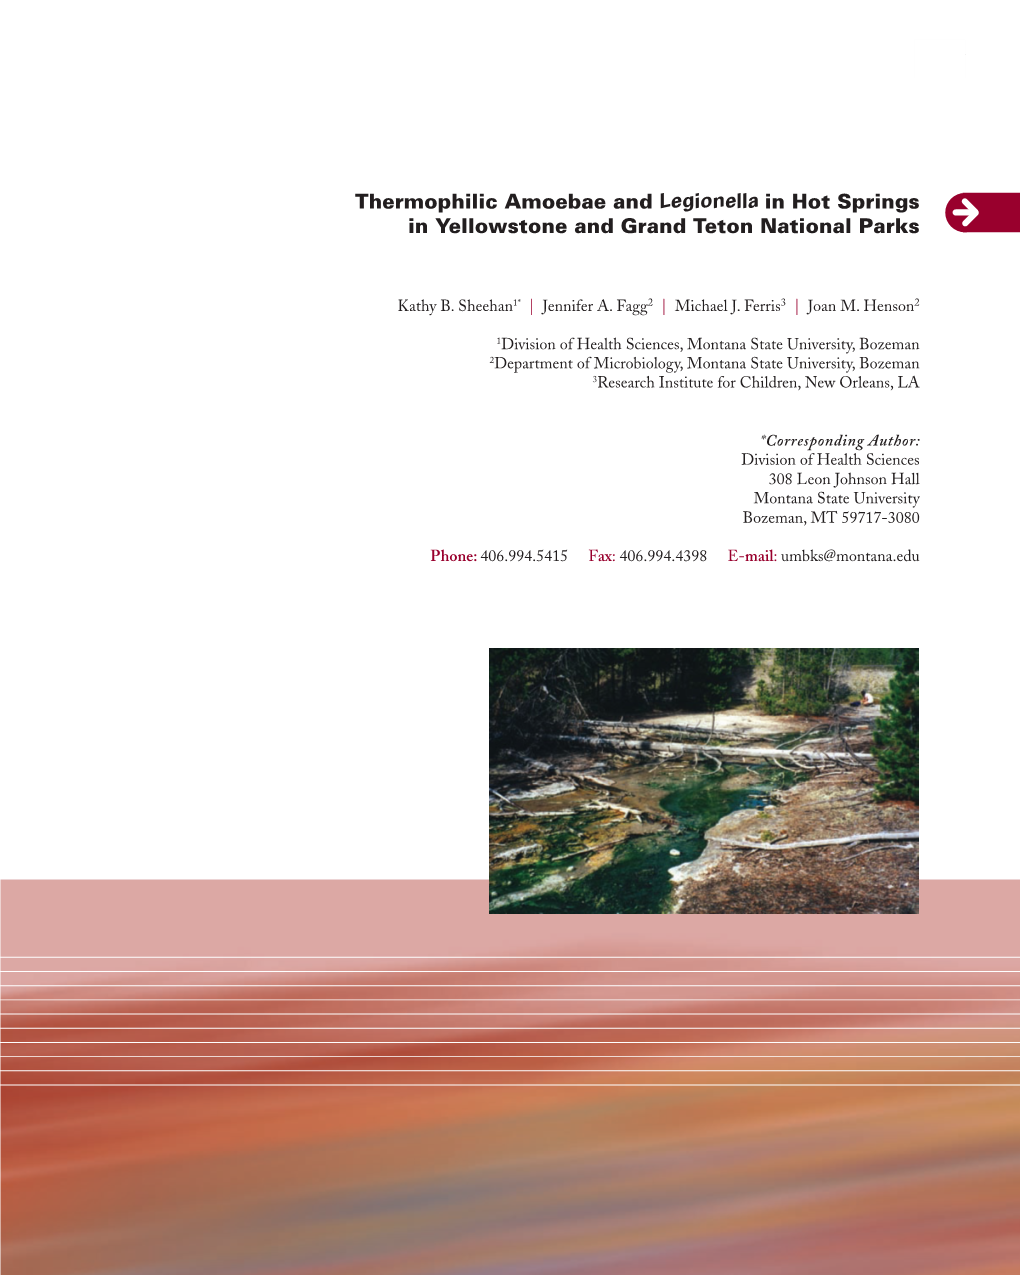 Thermophilic Amoebae and Legionella in Hot Springs In